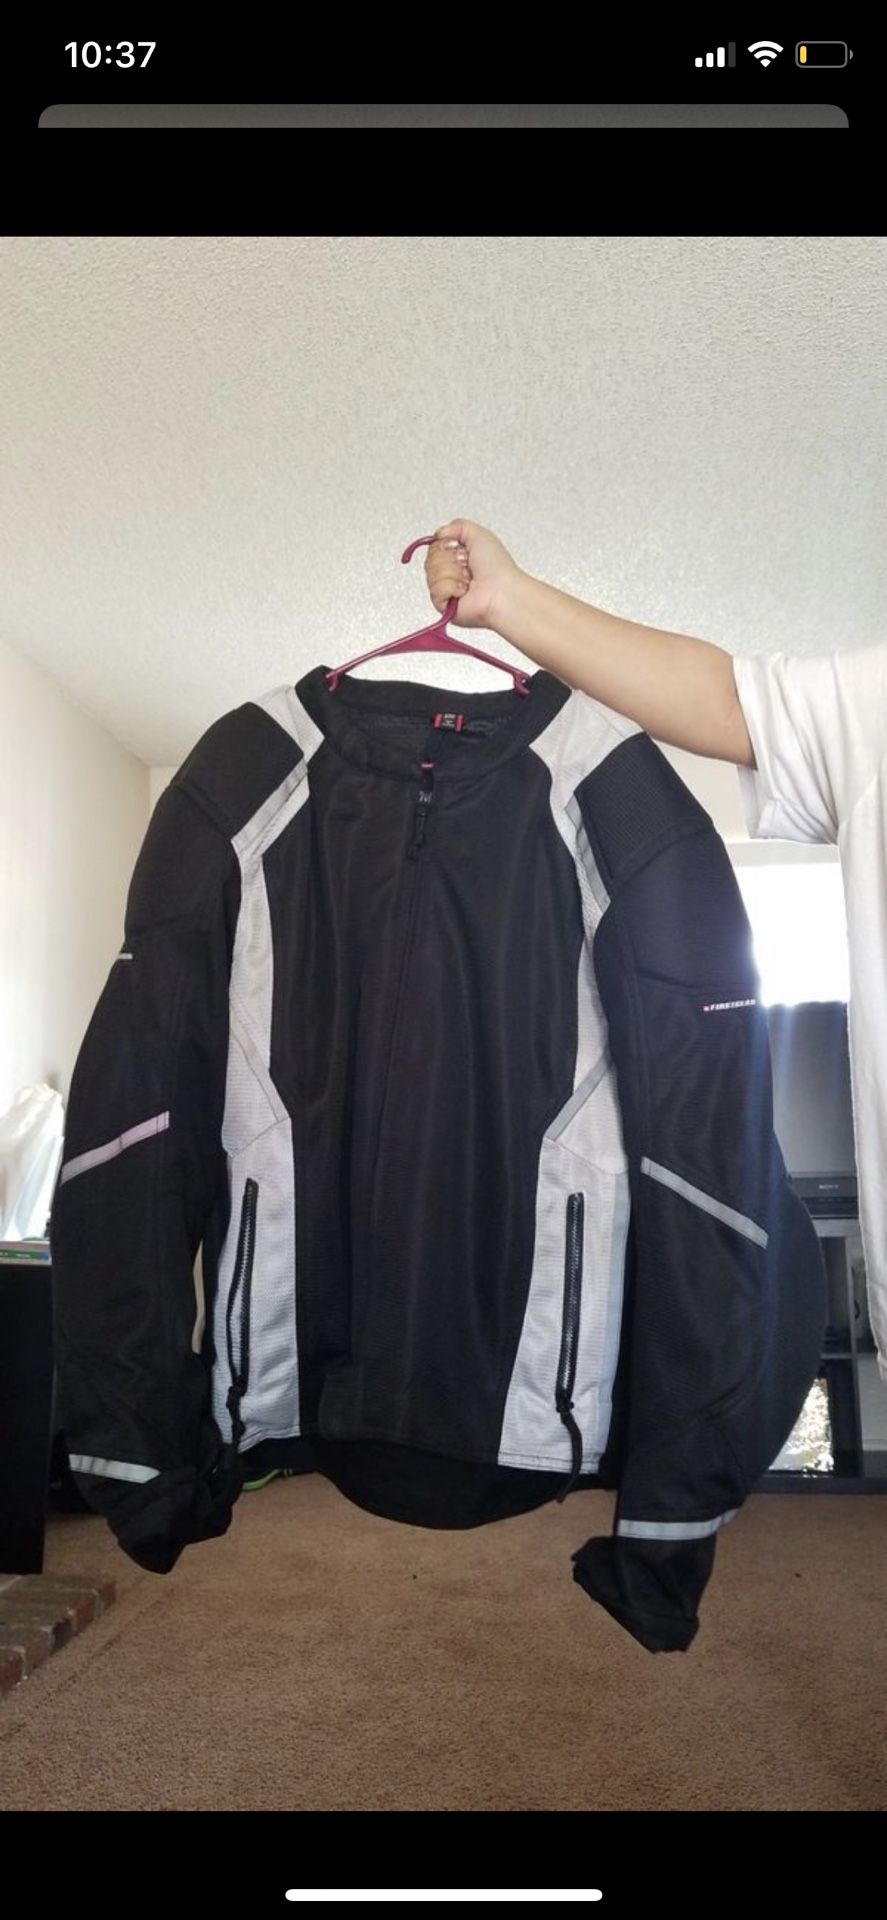 First gear motorcycle jacket 3xl